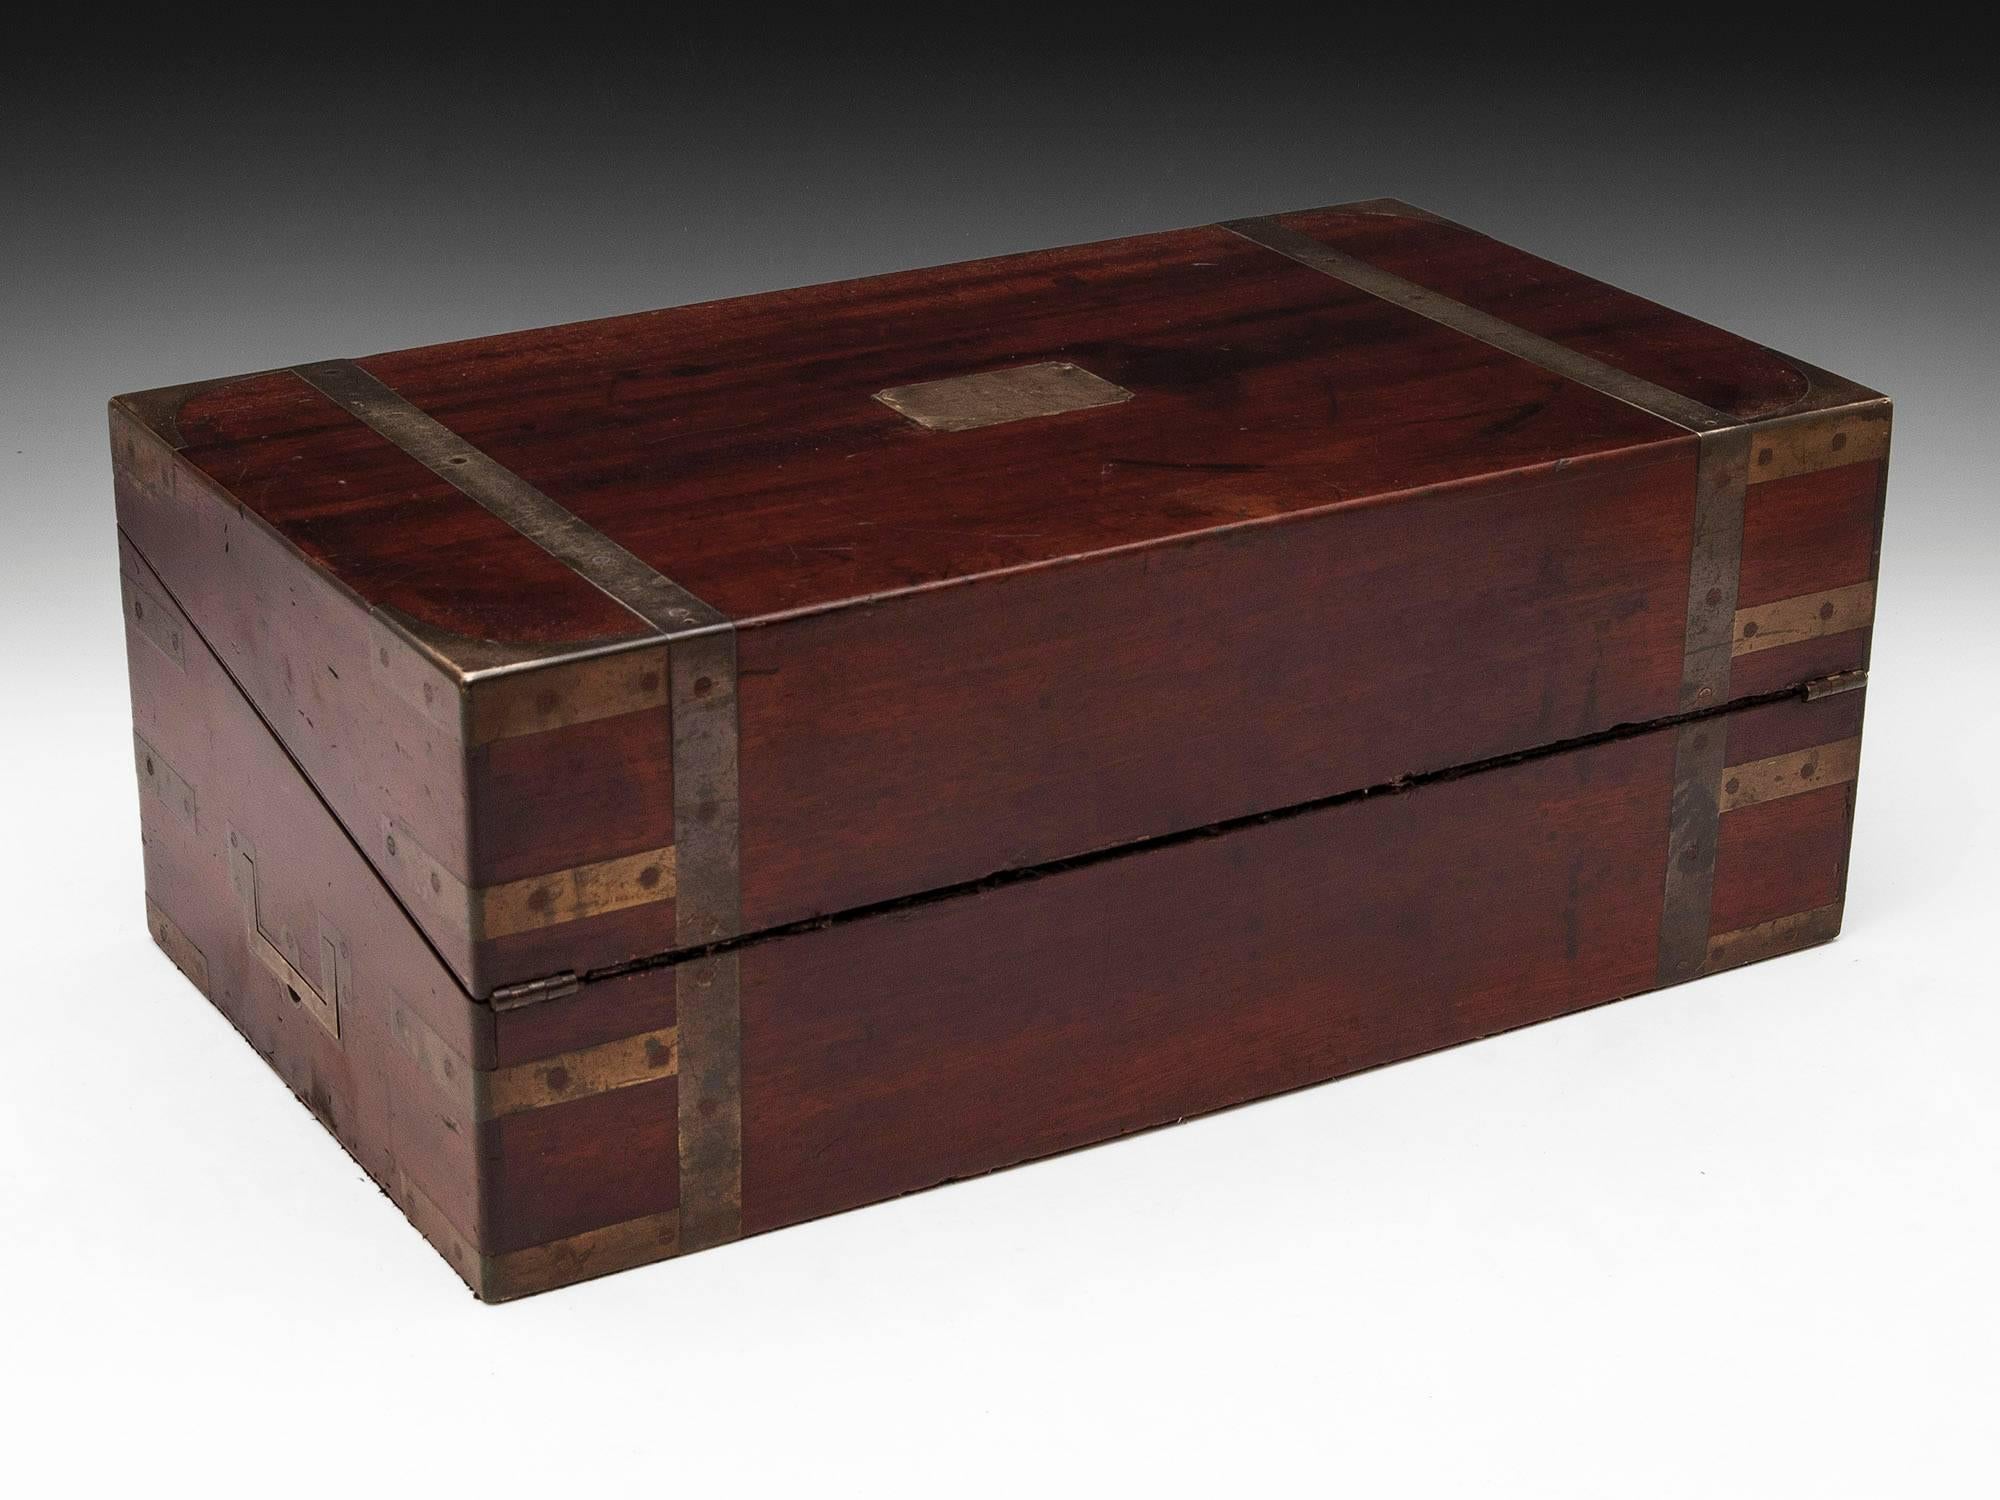 Georgian military mahogany writing box with brass straps running from front to back, brass corner braces, initial plate and ornate escutcheon. Contains secret drawers and has fantastic patination. 

The interior features its original baize cloth